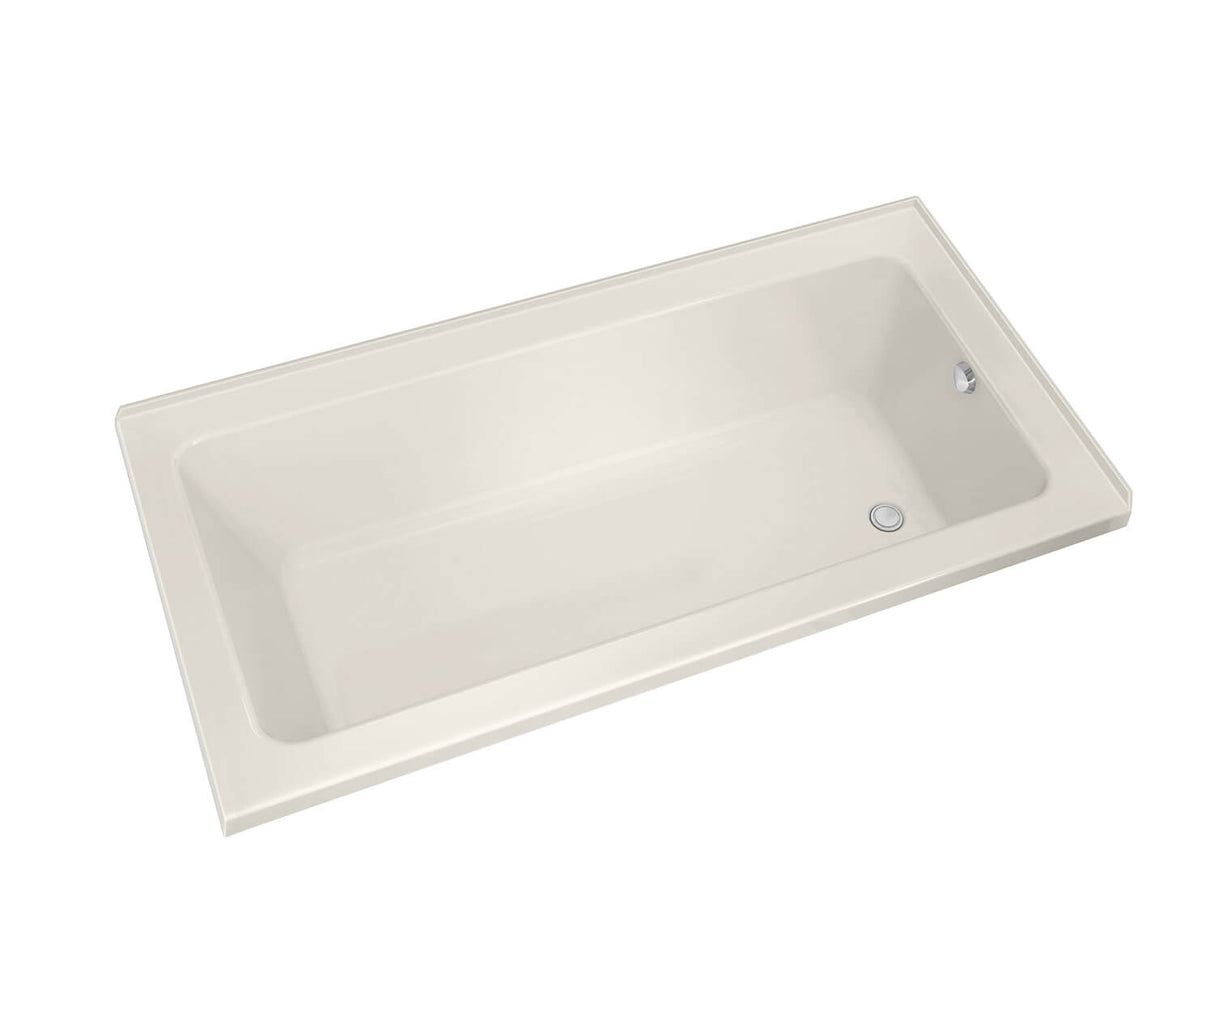 MAAX 106203-L-003-007 Pose 6032 IF Acrylic Corner Right Left-Hand Drain Whirlpool Bathtub in Biscuit